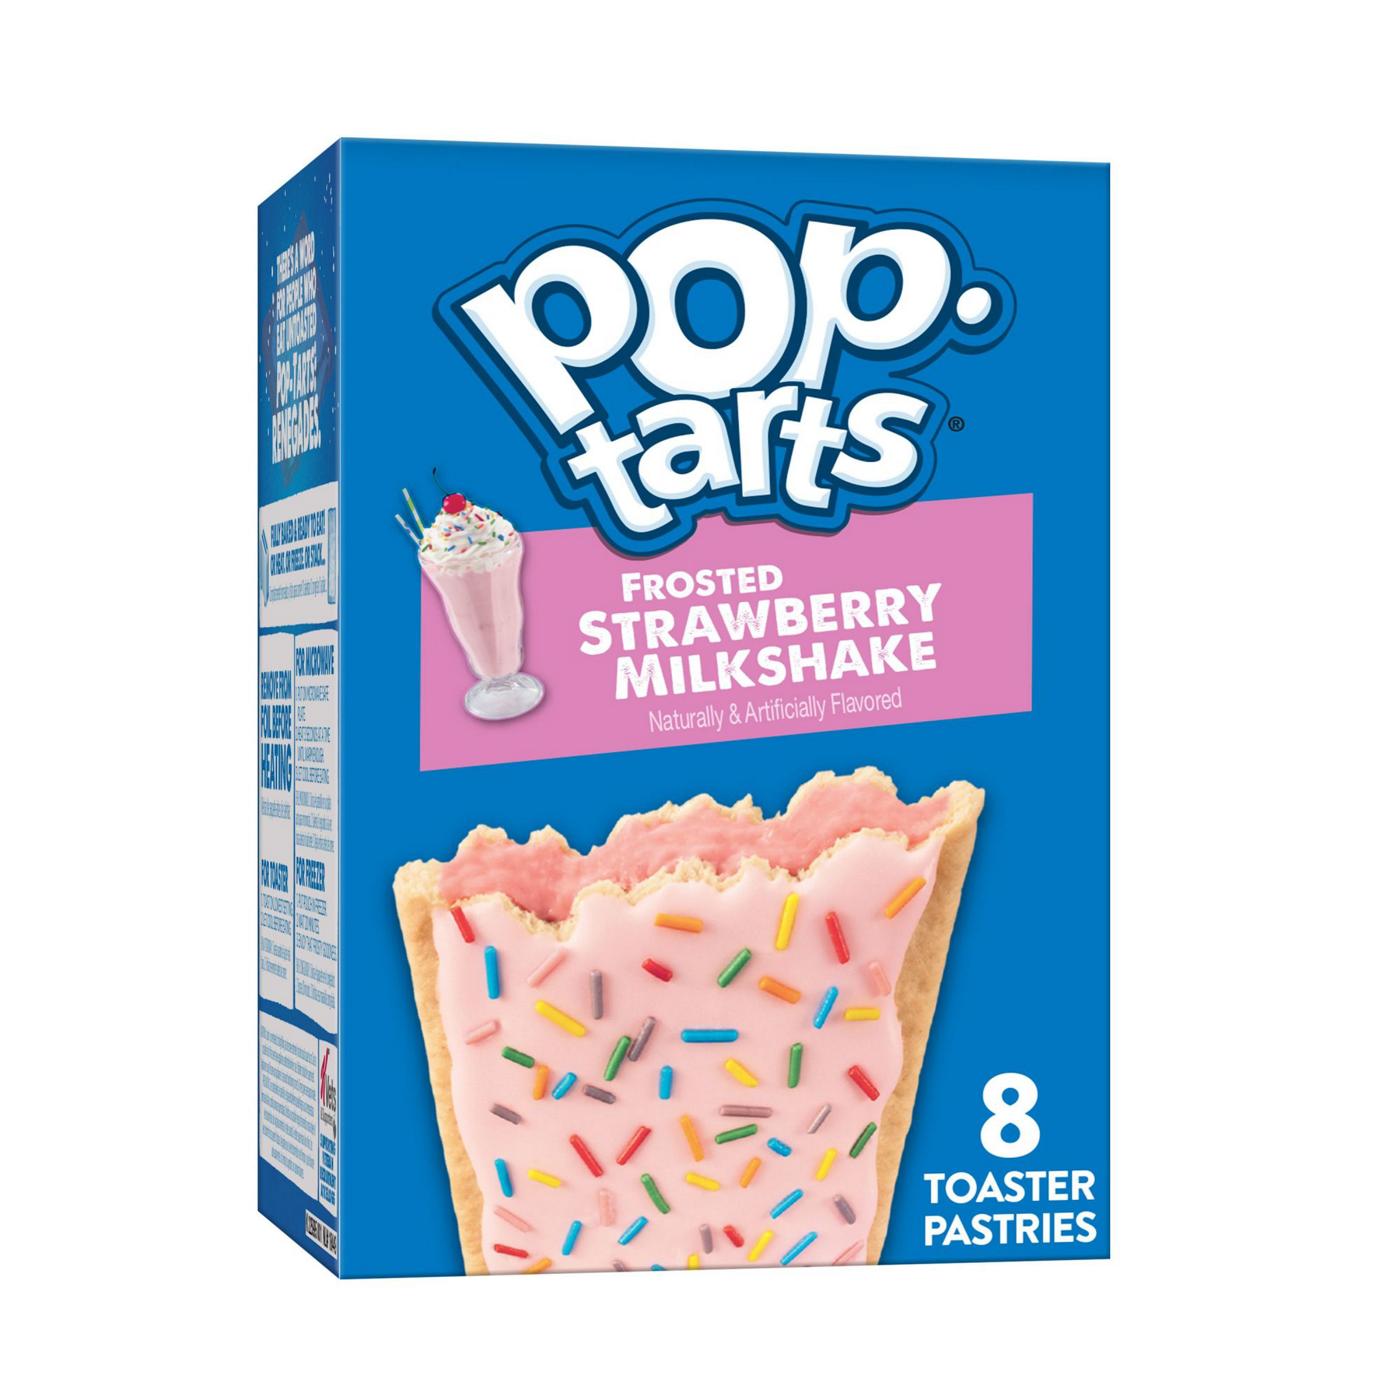 Pop-Tarts Frosted Strawberry Milkshake Toaster Pastries; image 5 of 6